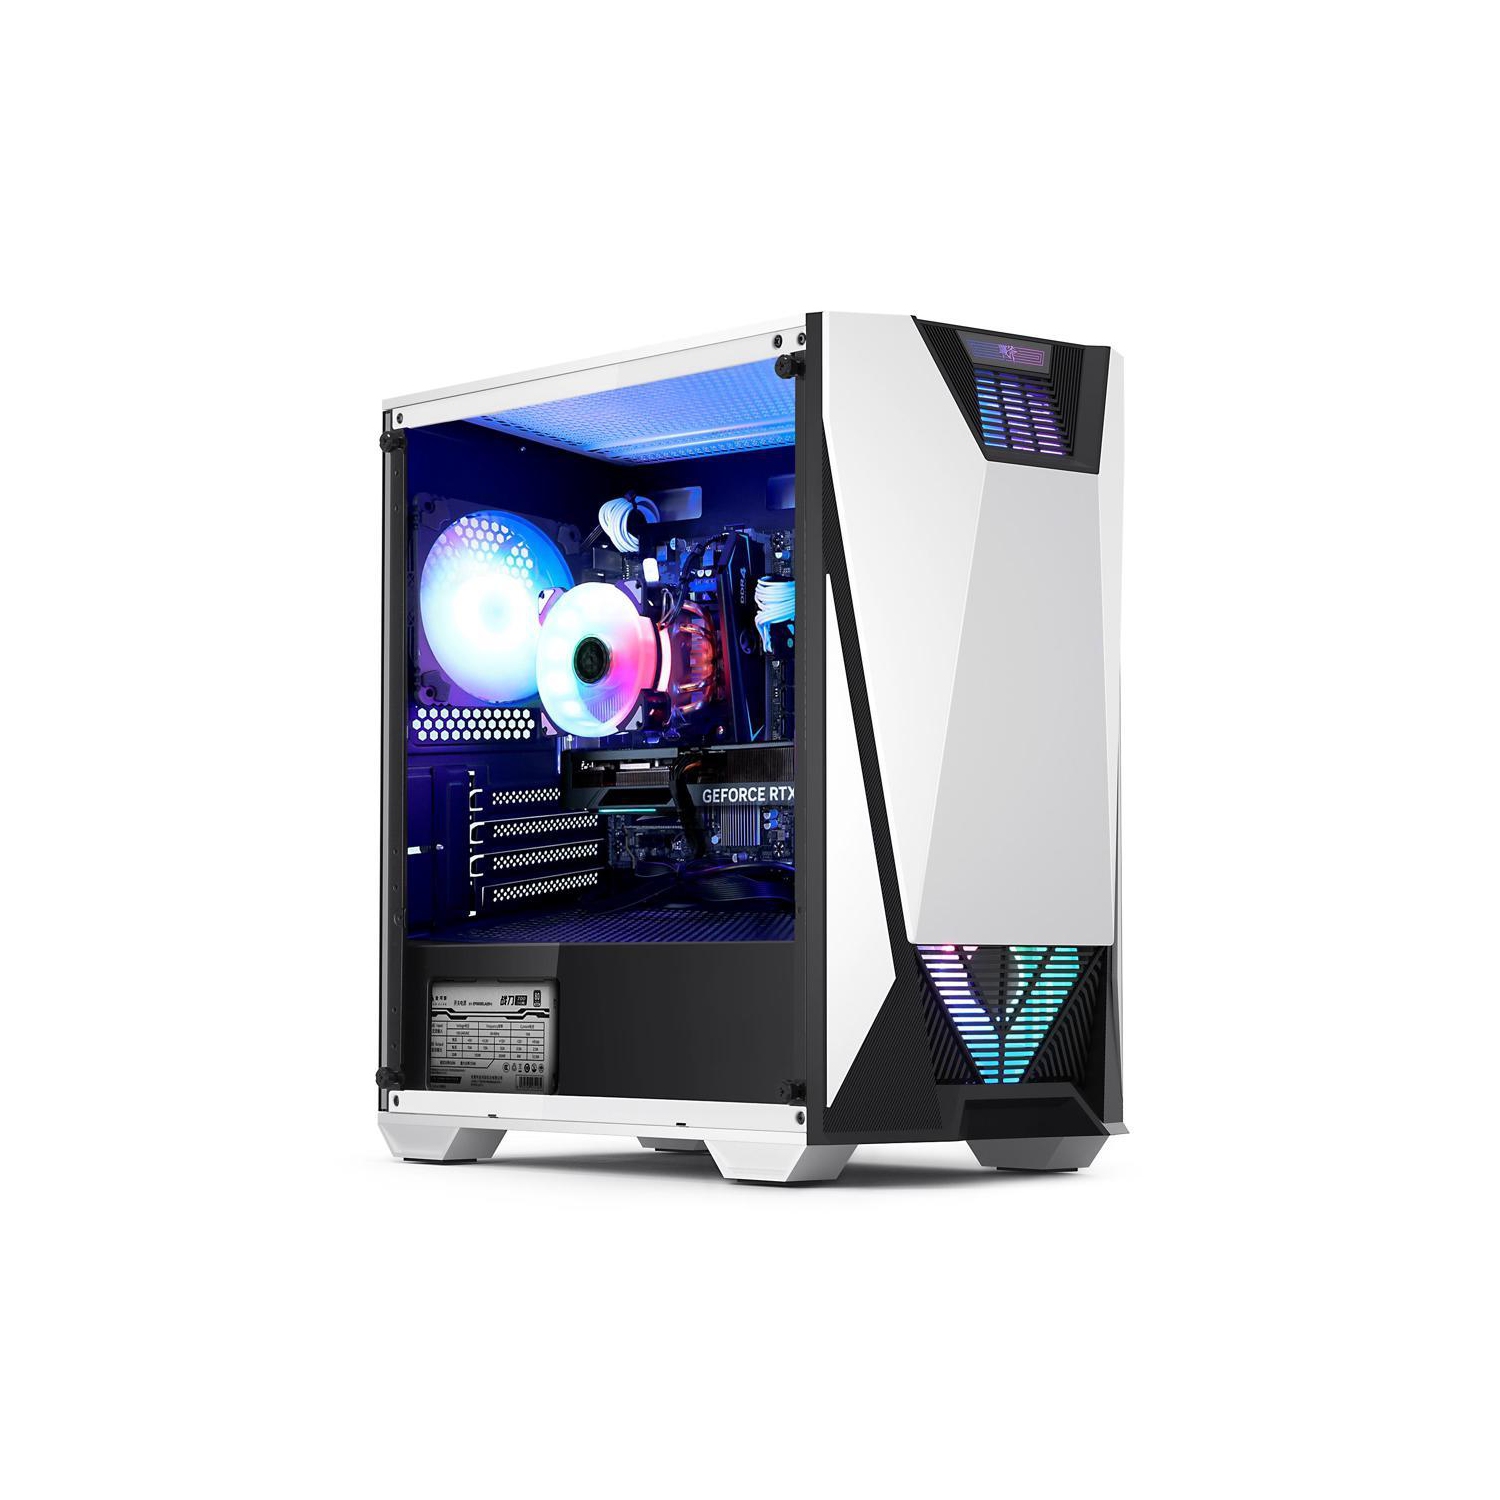 Hoengager Battleaxe Gaming - Intel Core i5-12600K 10-Core 3.7GHz-NVIDIA GeForce RTX 3060 Ti- 32GB DDR4 3200MHz - 1TB+500GB M.2 NVMe SSD- WIFI -RGB Fans - Windows 11 Pro Computer